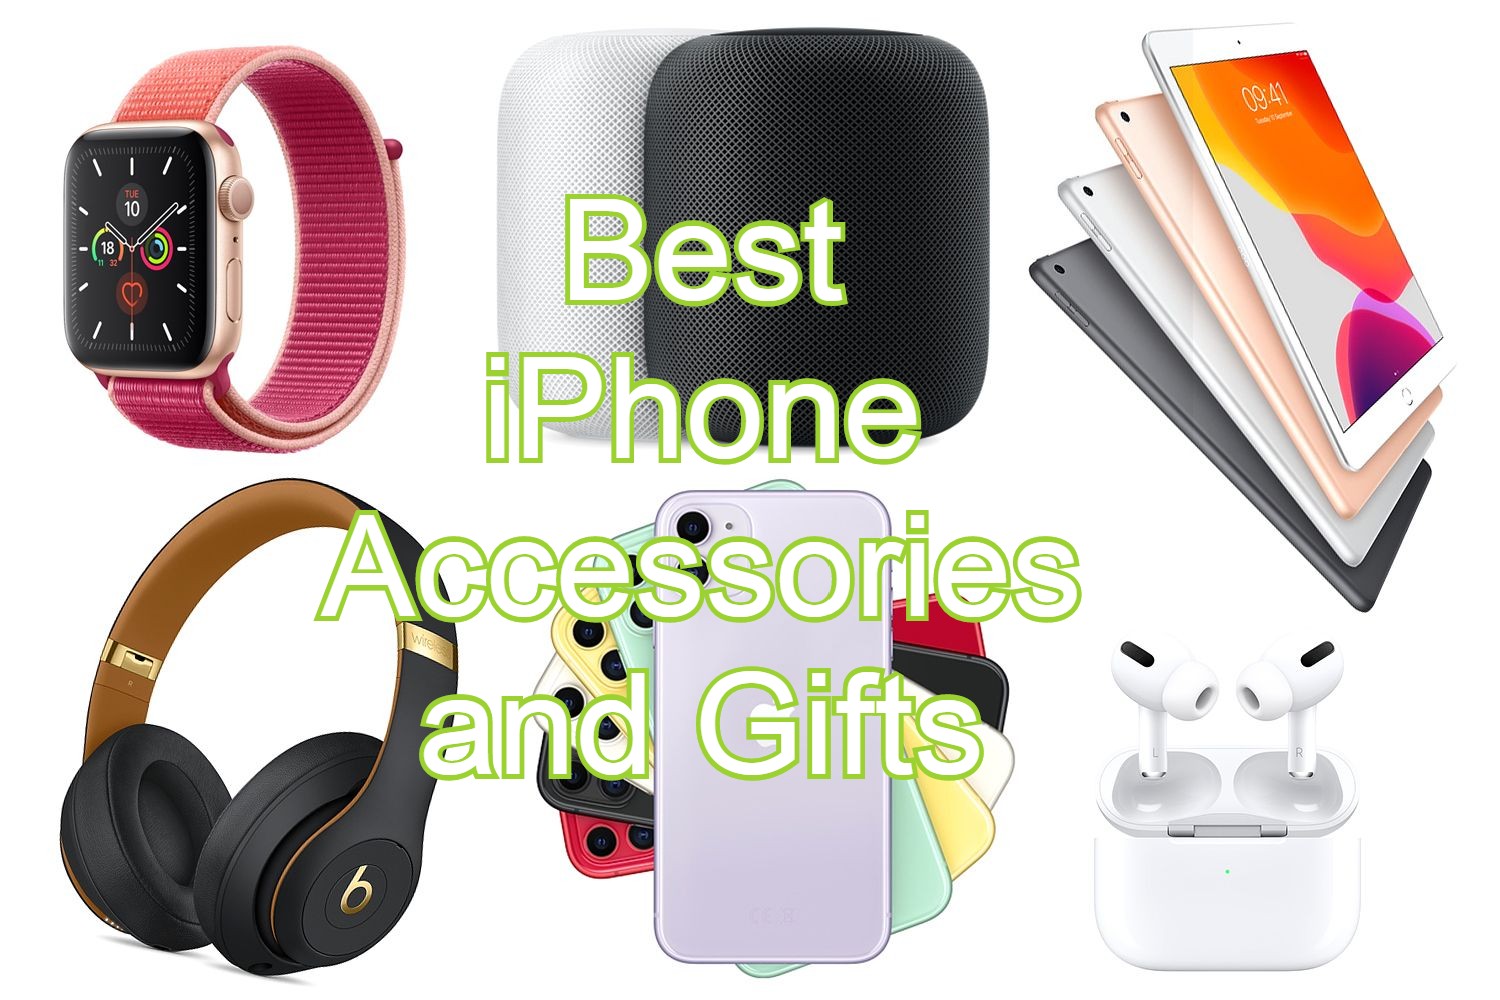 Apple Accessories for Apple Watch, iPhone, iPad and Mac - Apple (IN)